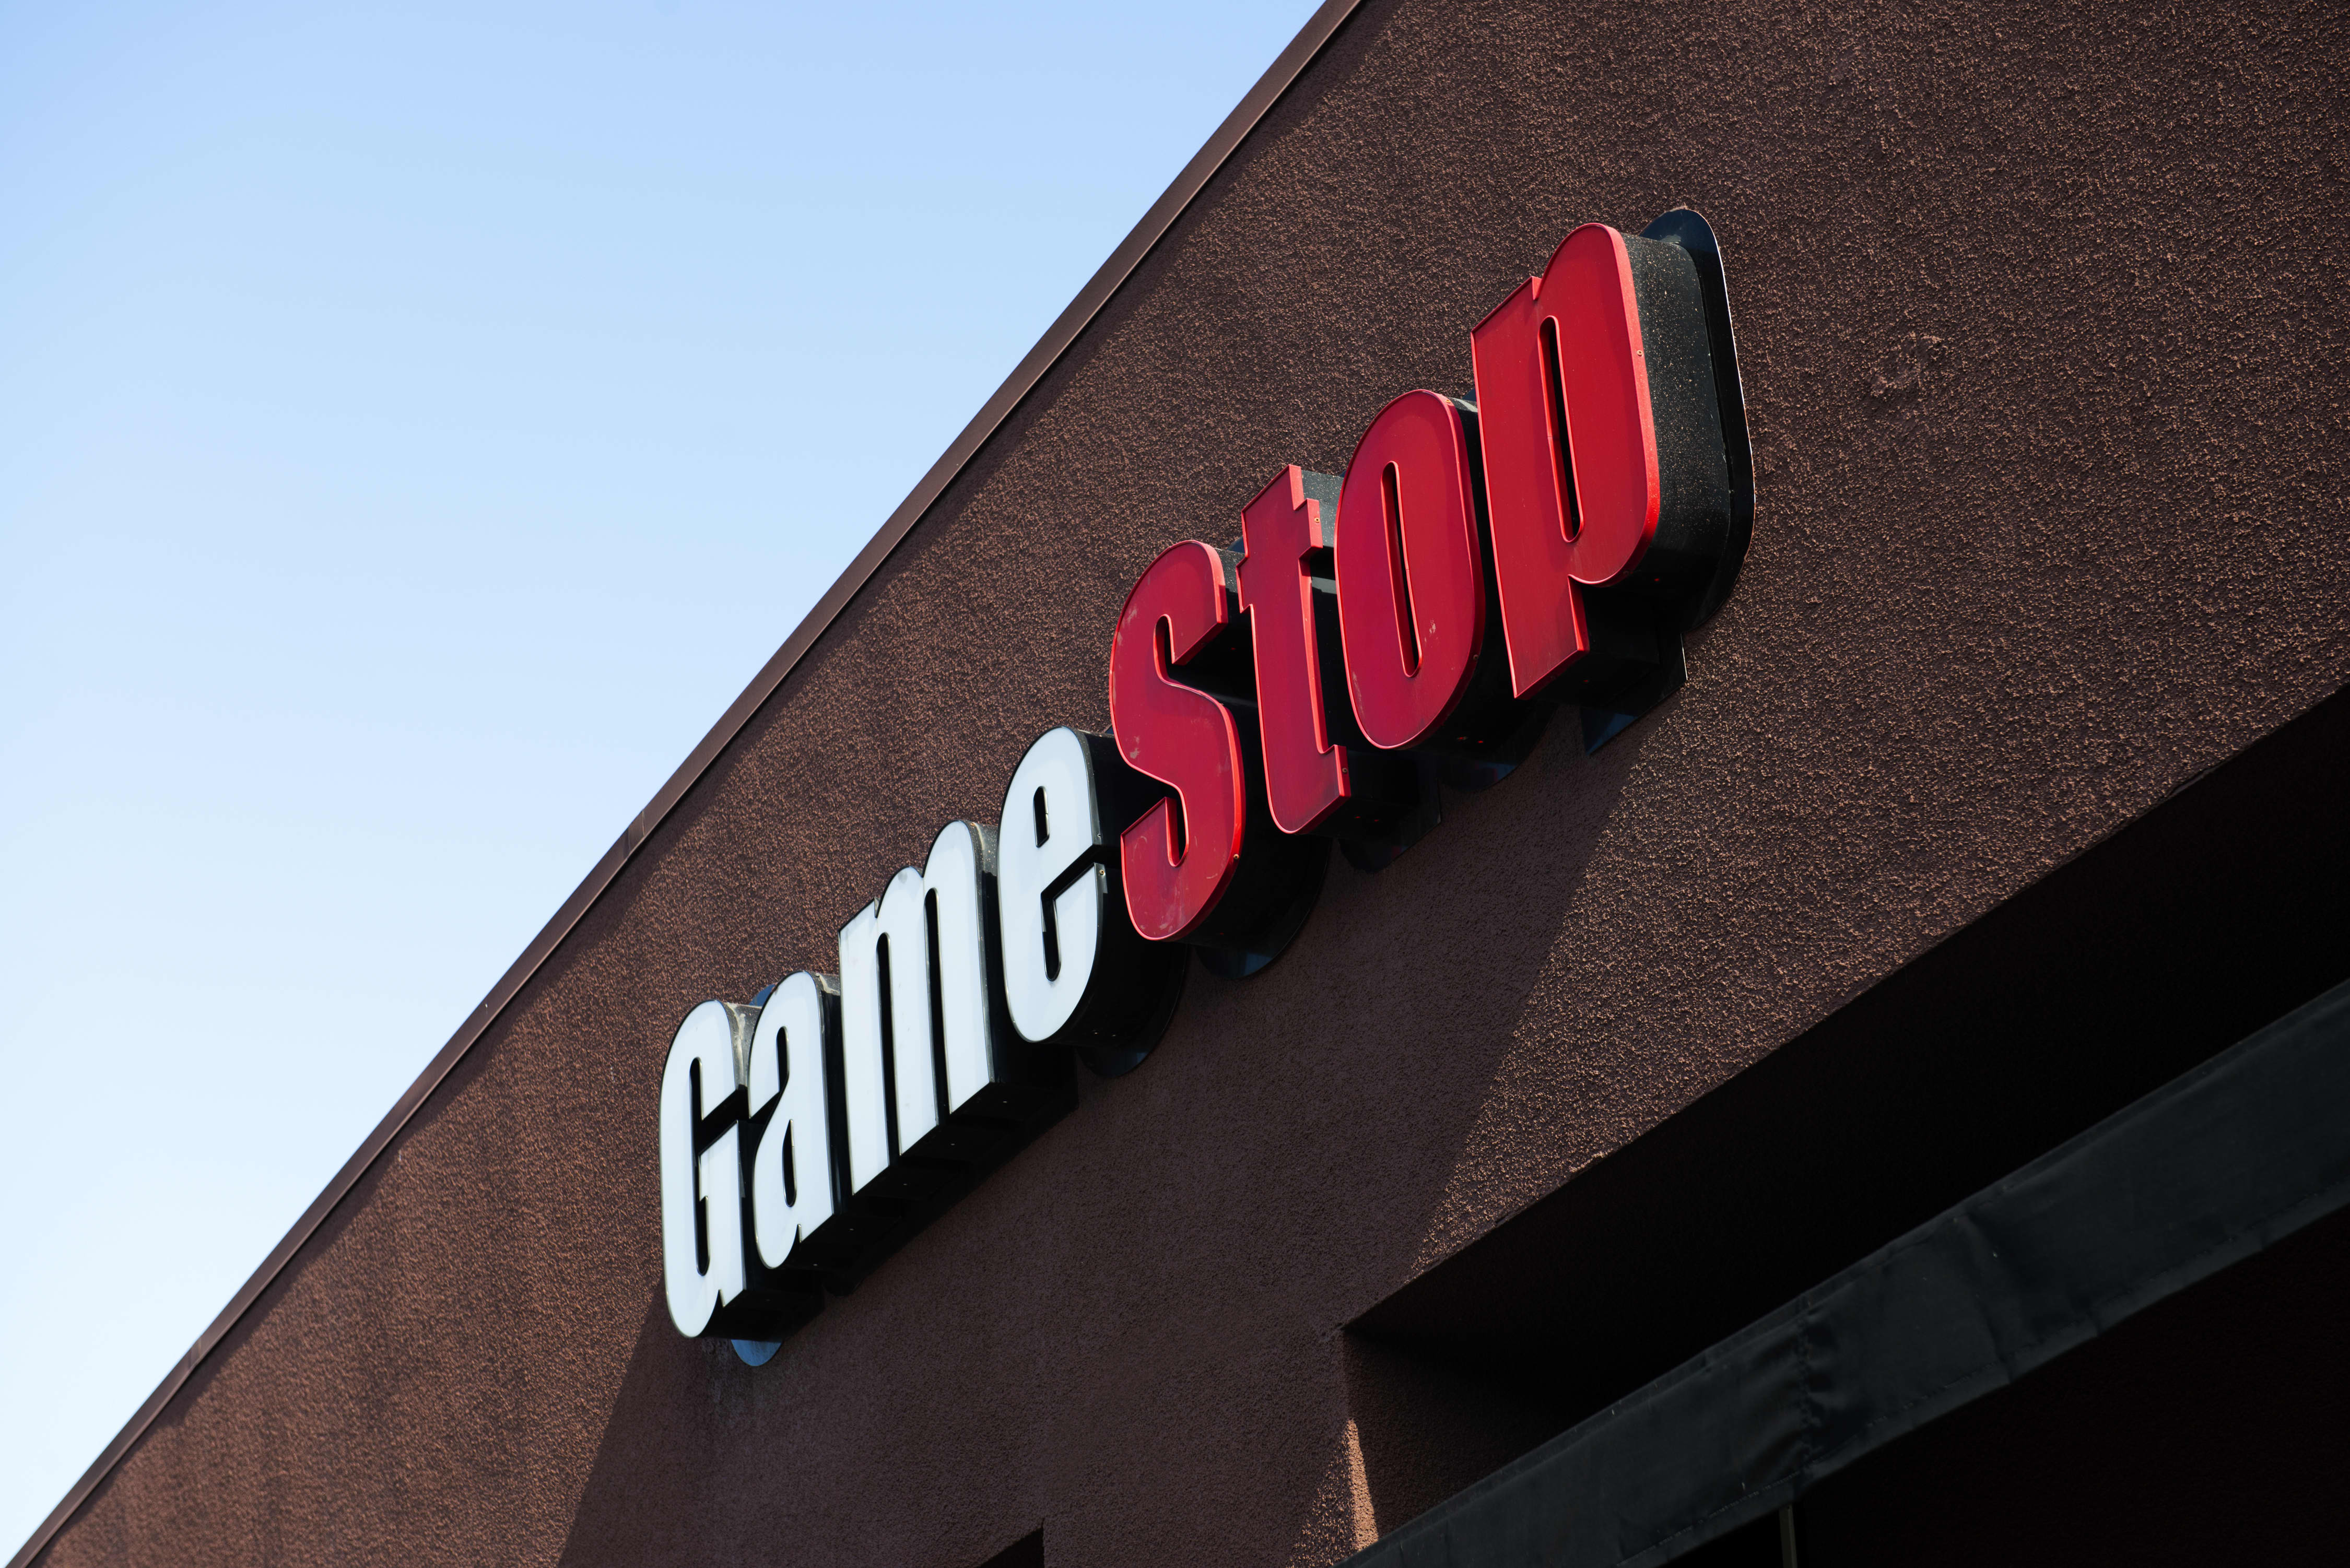 GameStop frenzy leads to unrealistic expectations for returns